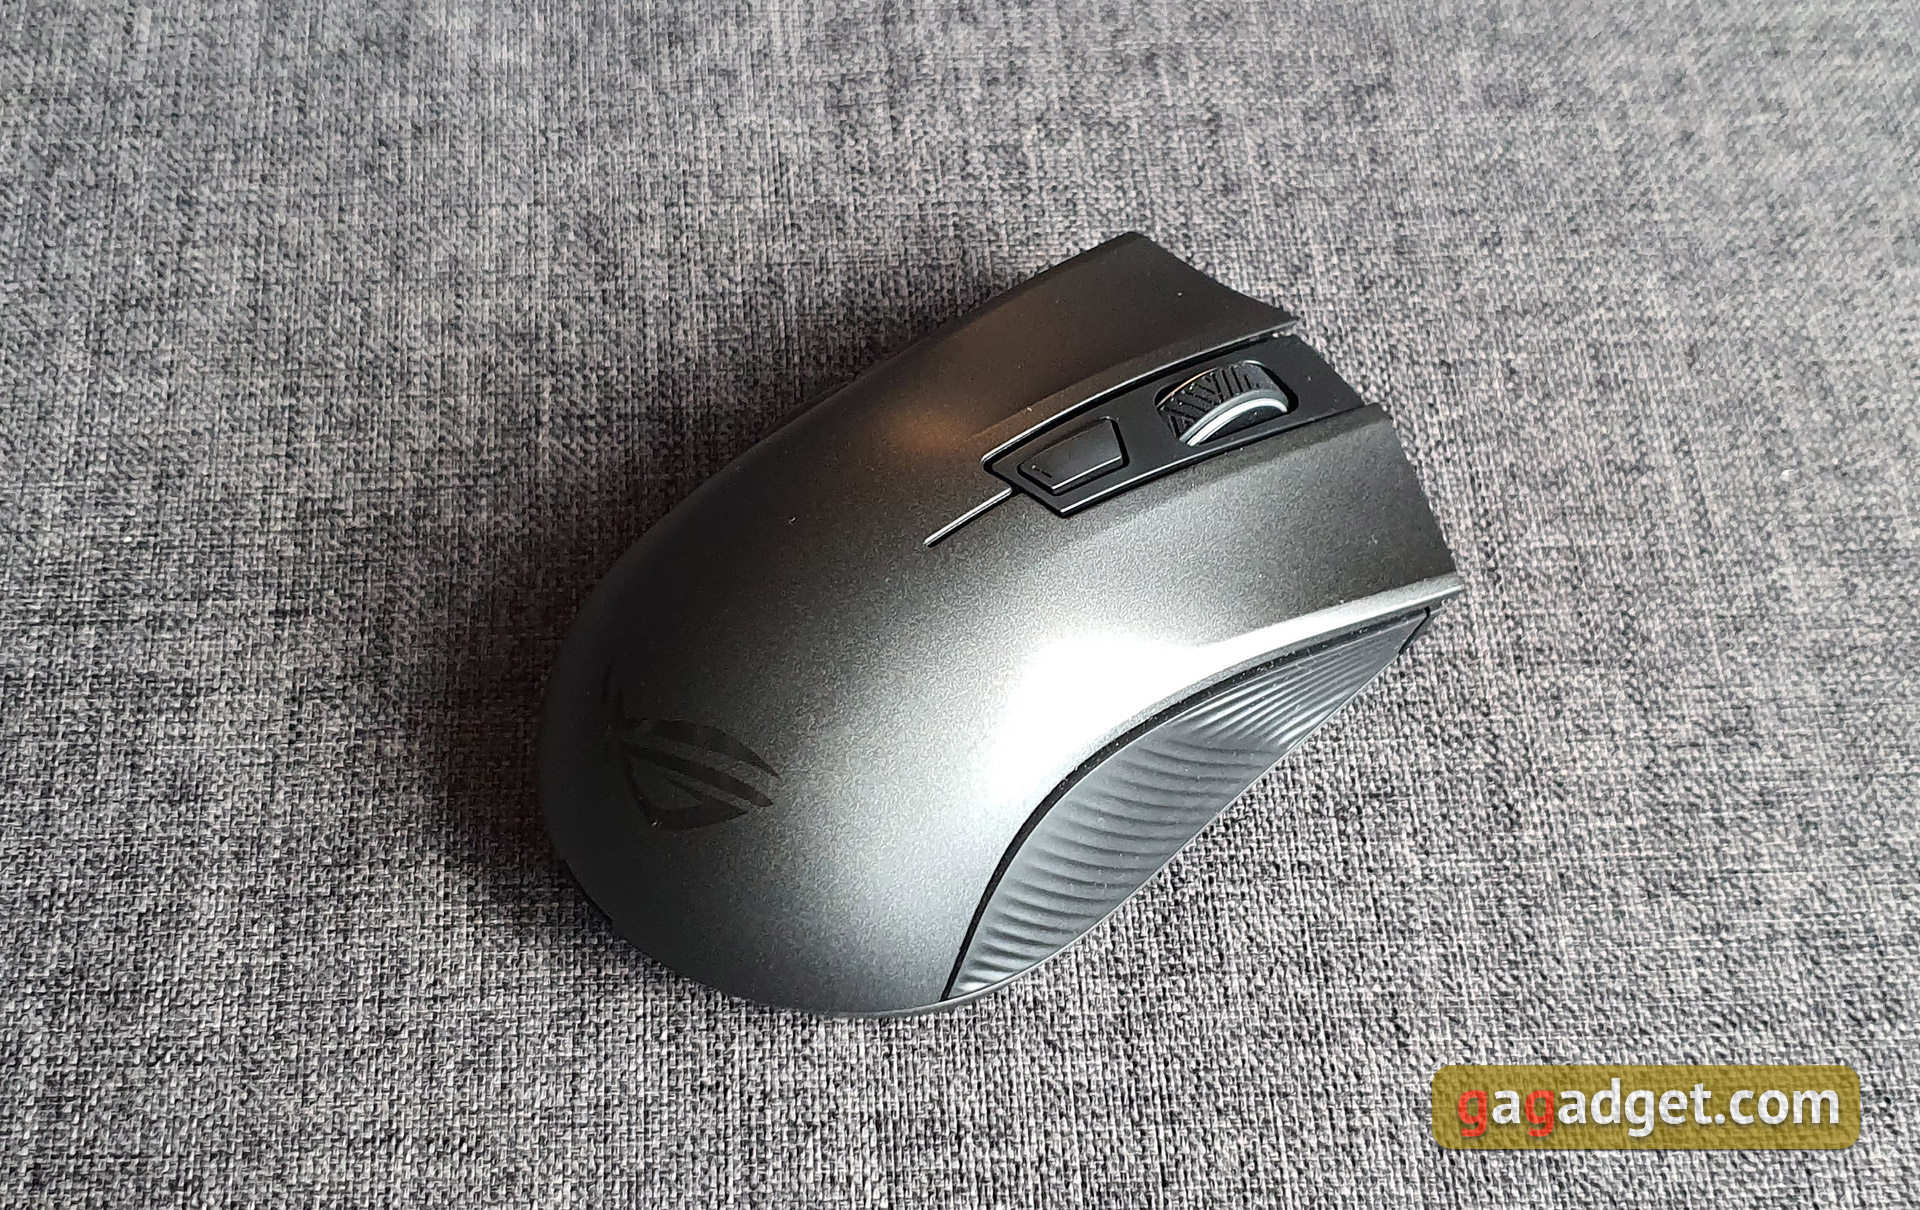 Asus Rog Strix Carry Review Wireless Gaming Mouse For Traveling Gamers Geek Tech Online